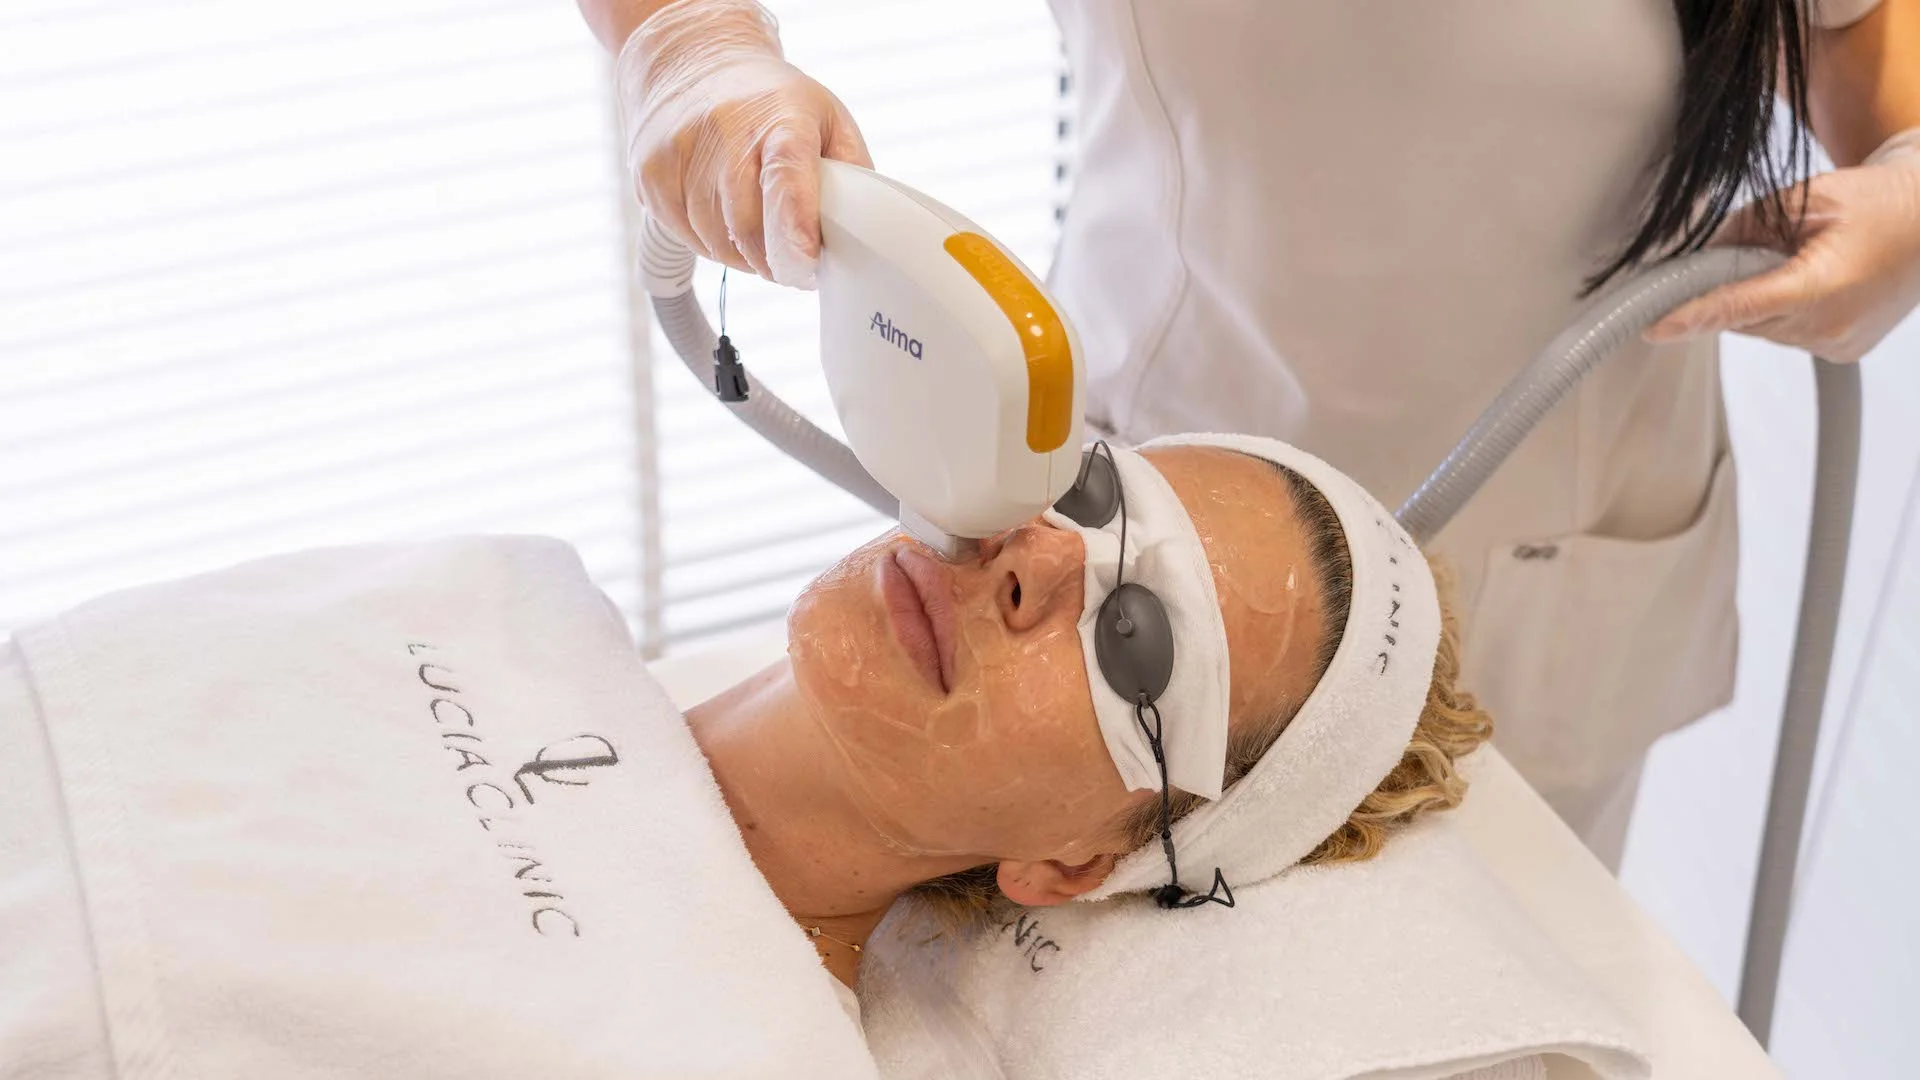 AFT photo-rejuvenation IPL advanced laser facial treatment - improve skin tone and texture, reduce wrinkles, and pigmentation with this non-invasive procedure.